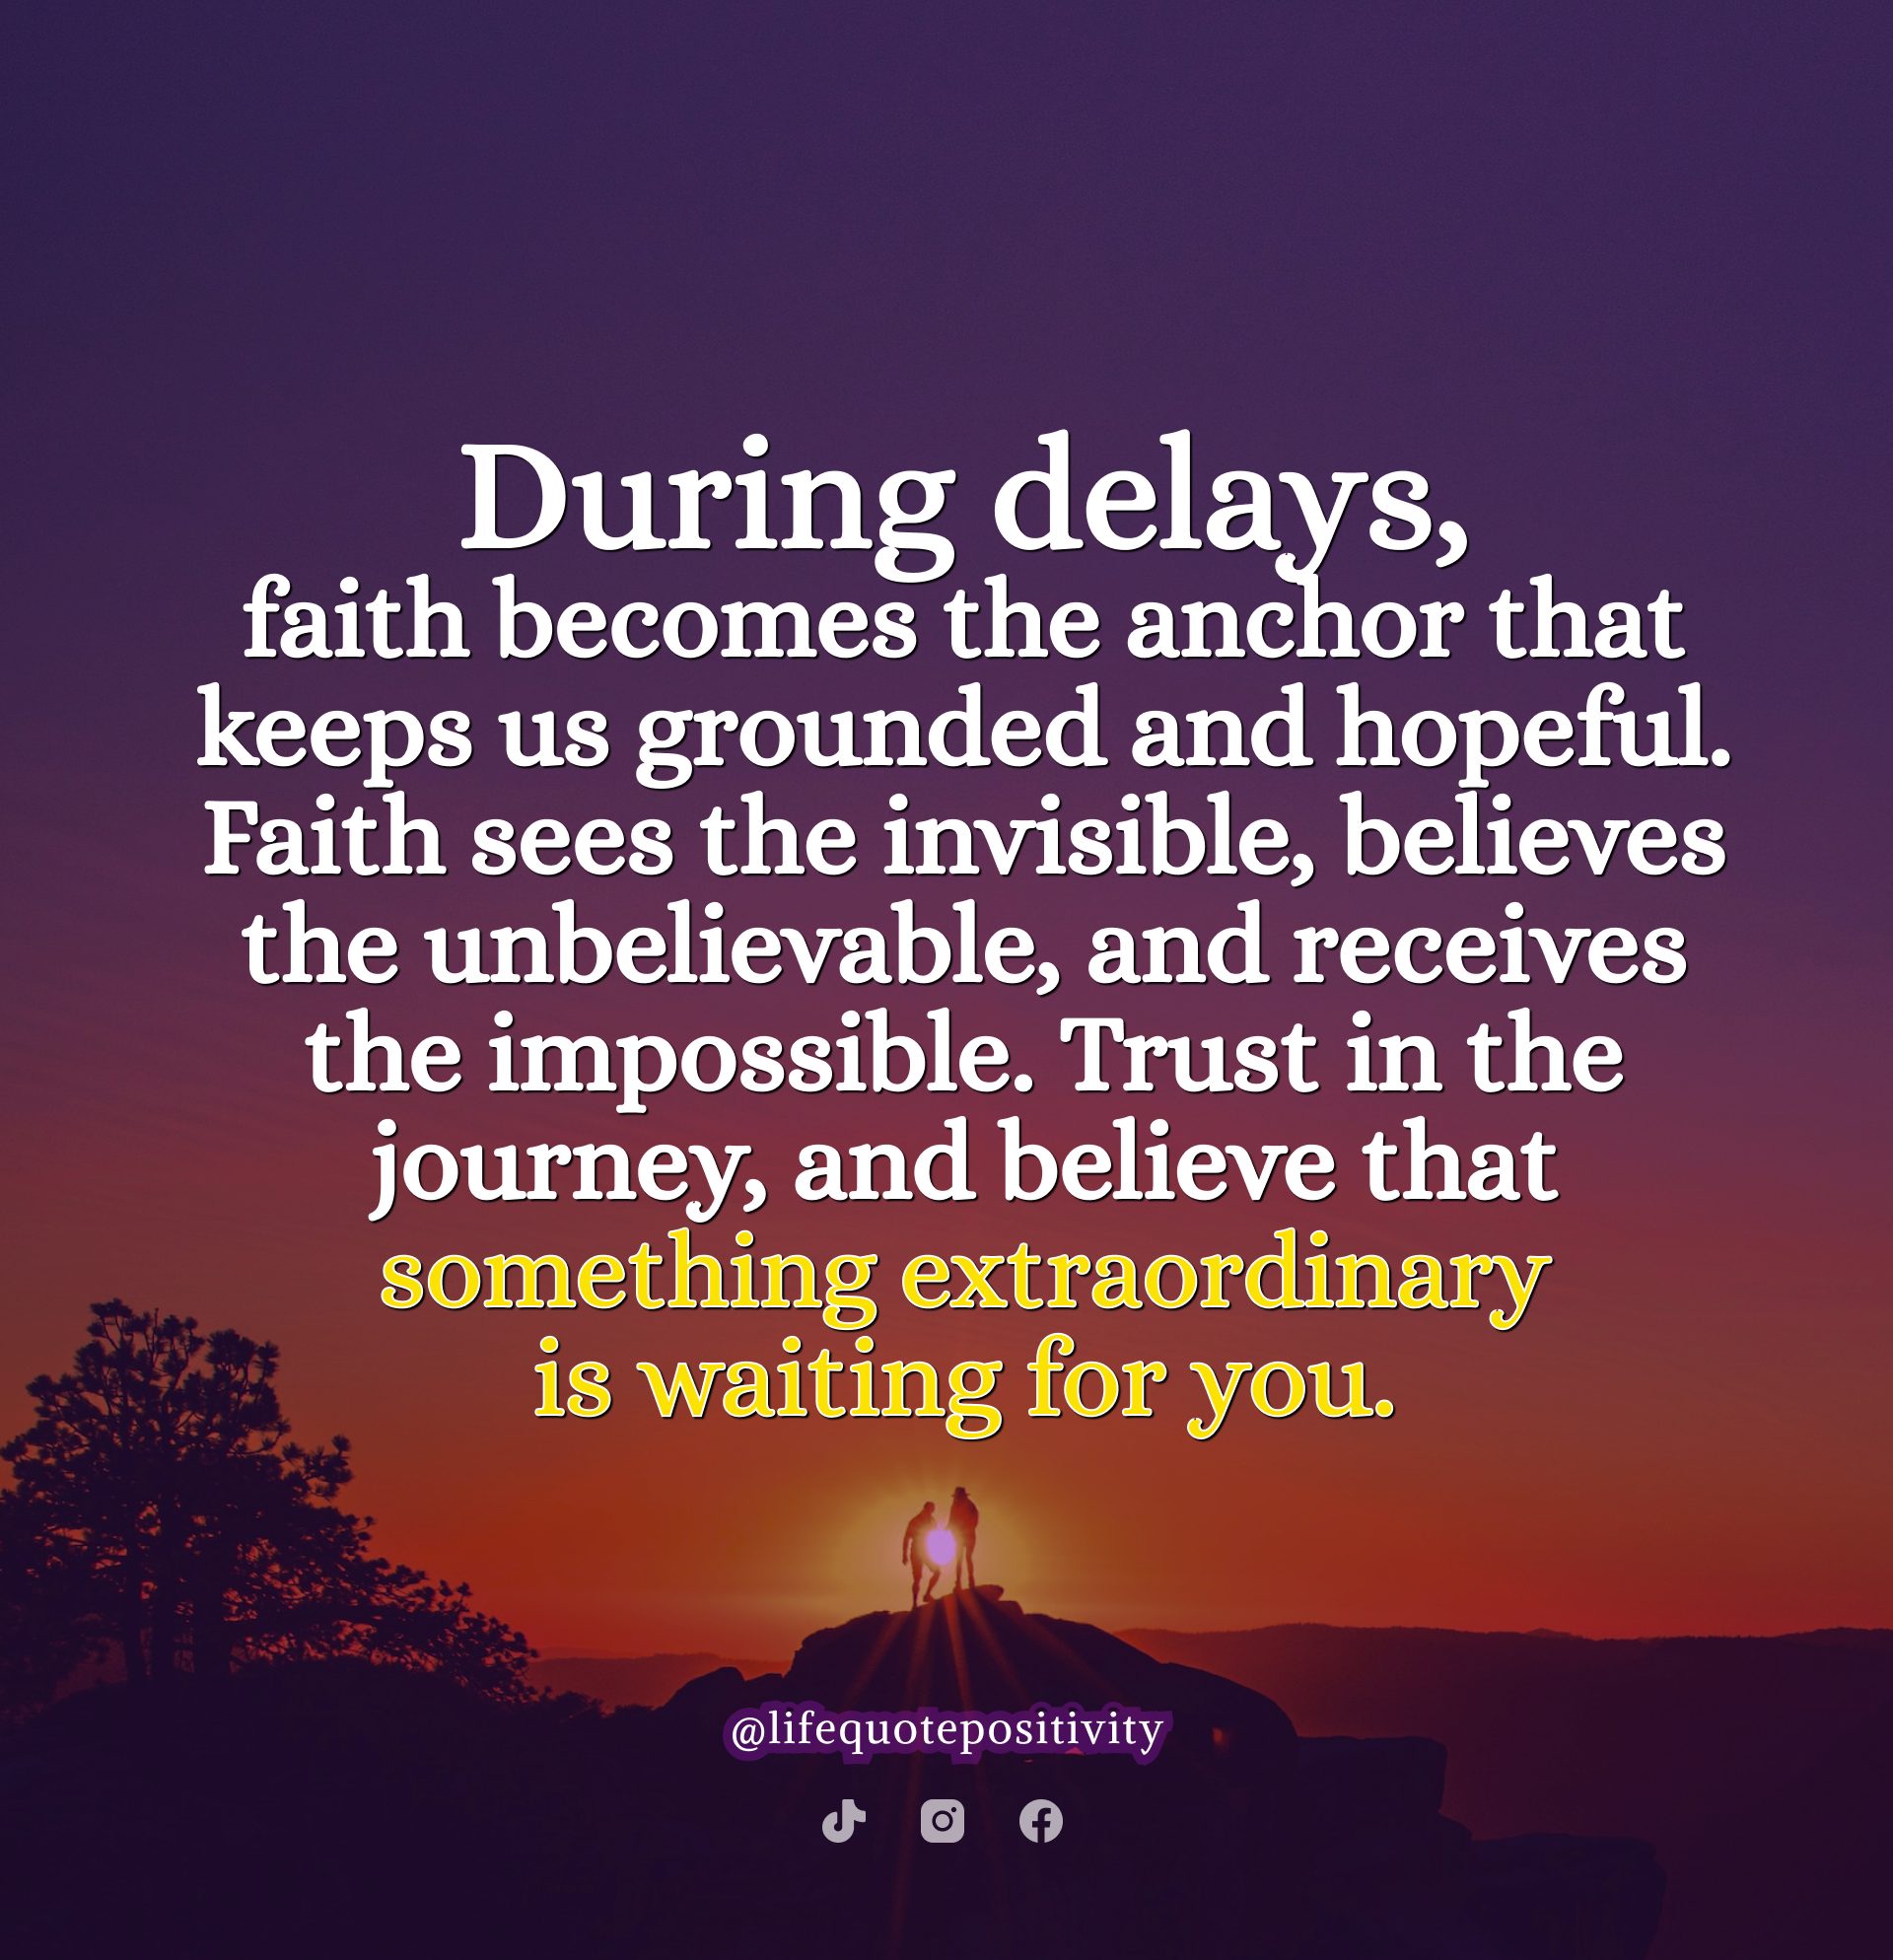 10 GREAT QUOTES ABOUT LIFE’S DELAYS AND TRUSTING YOUR JOURNEY